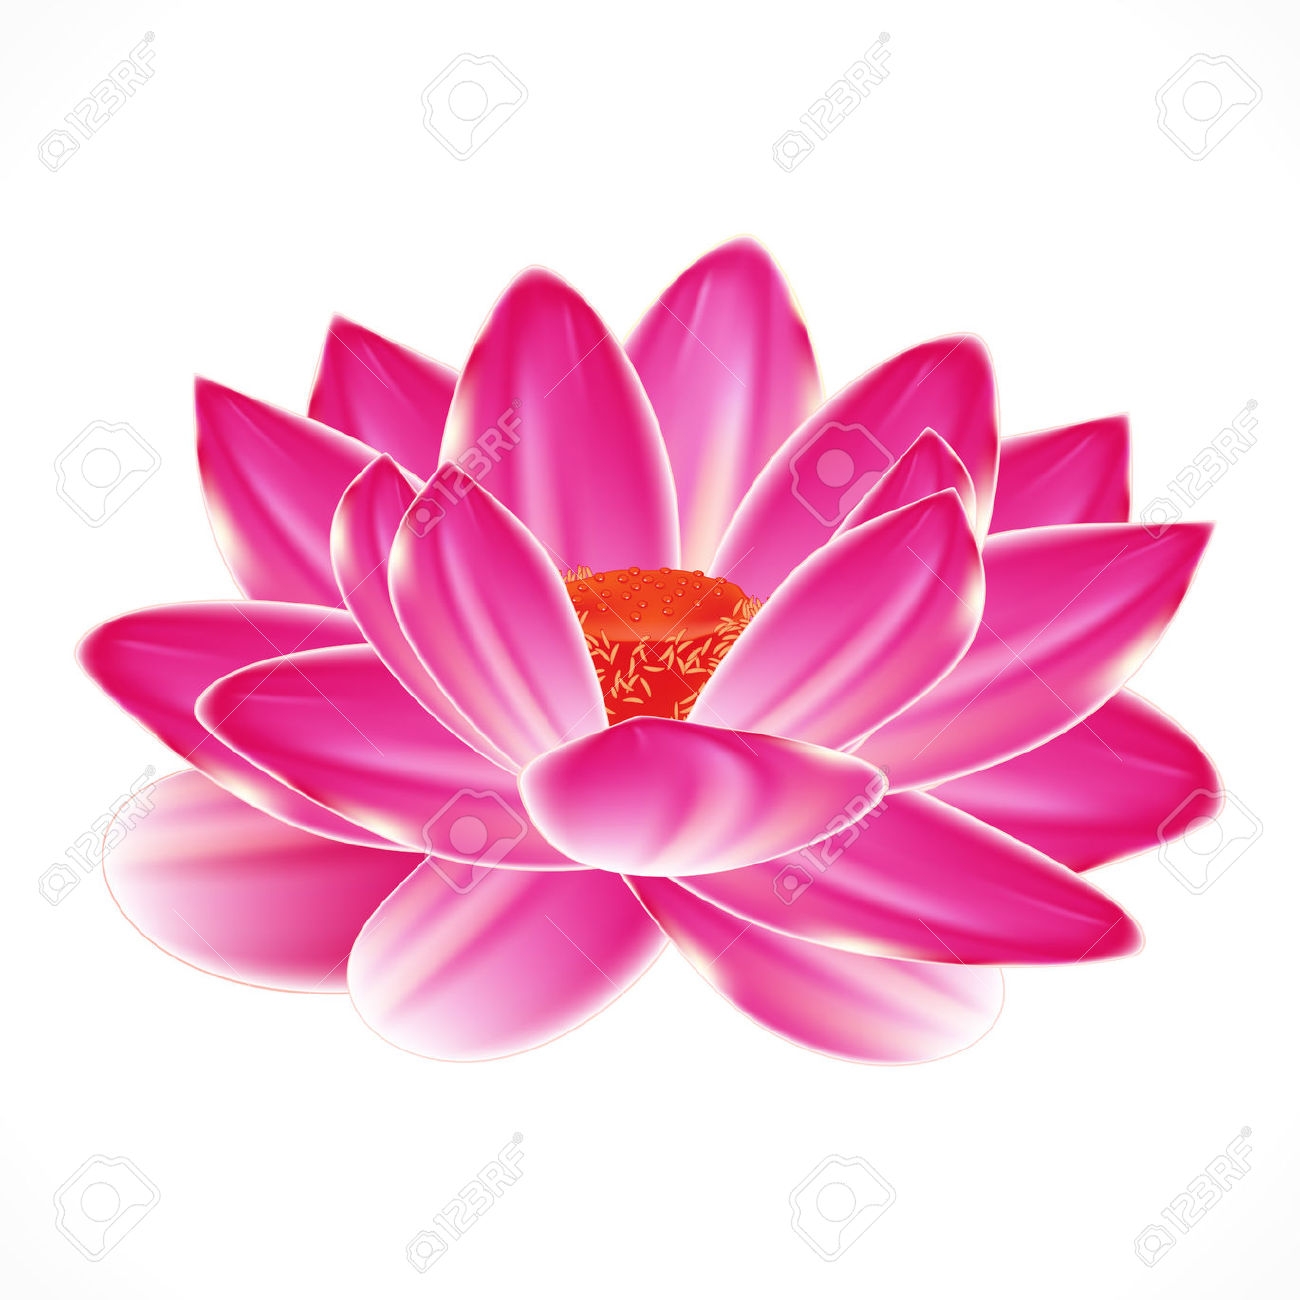 Water Lily Flower Clipart.